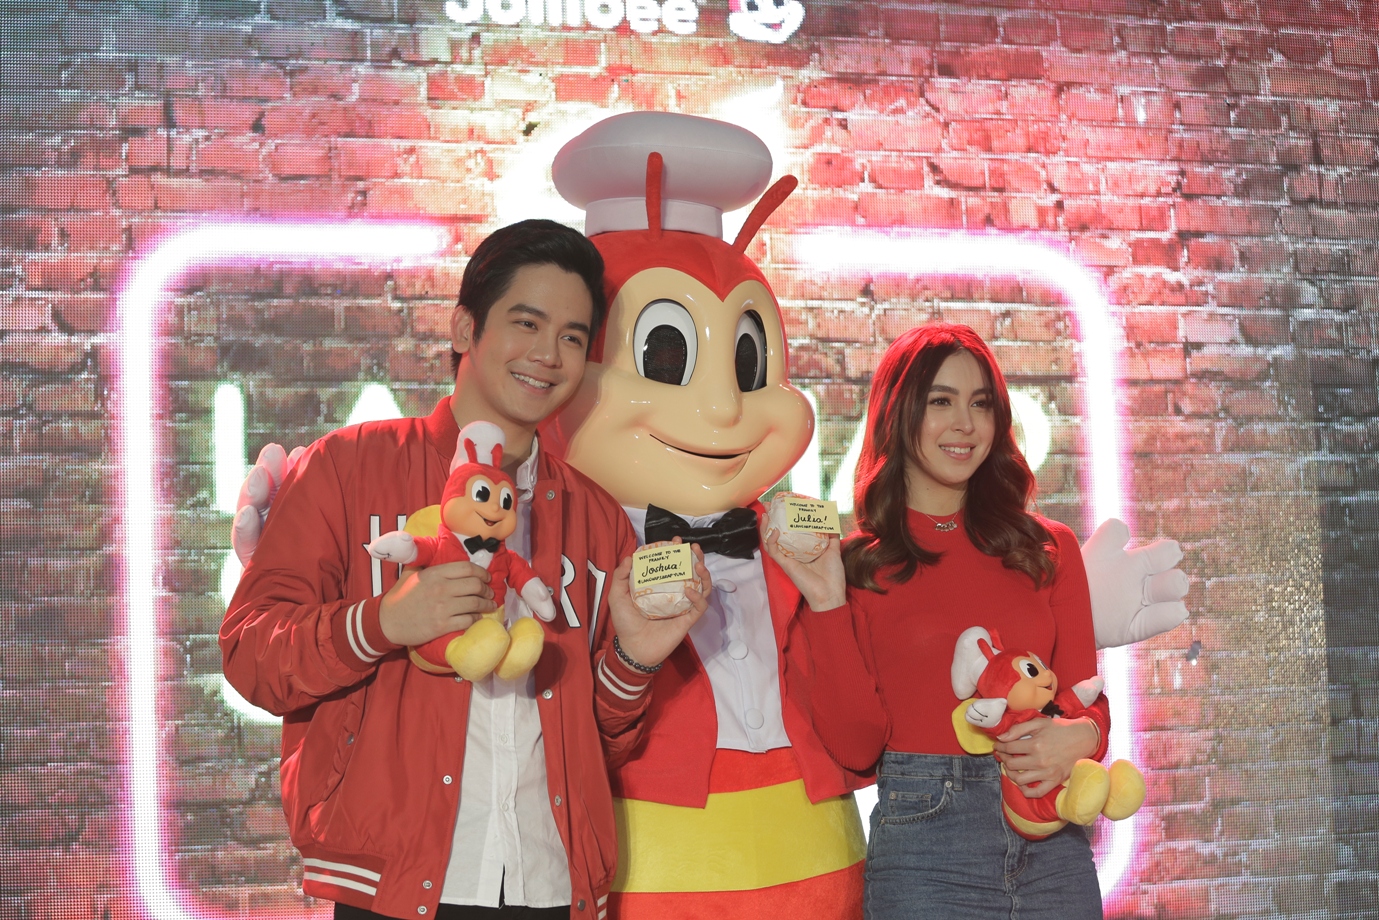 Joshua Garcia and Julia Barretto officially join Jollibee's growing framily of endorsers.